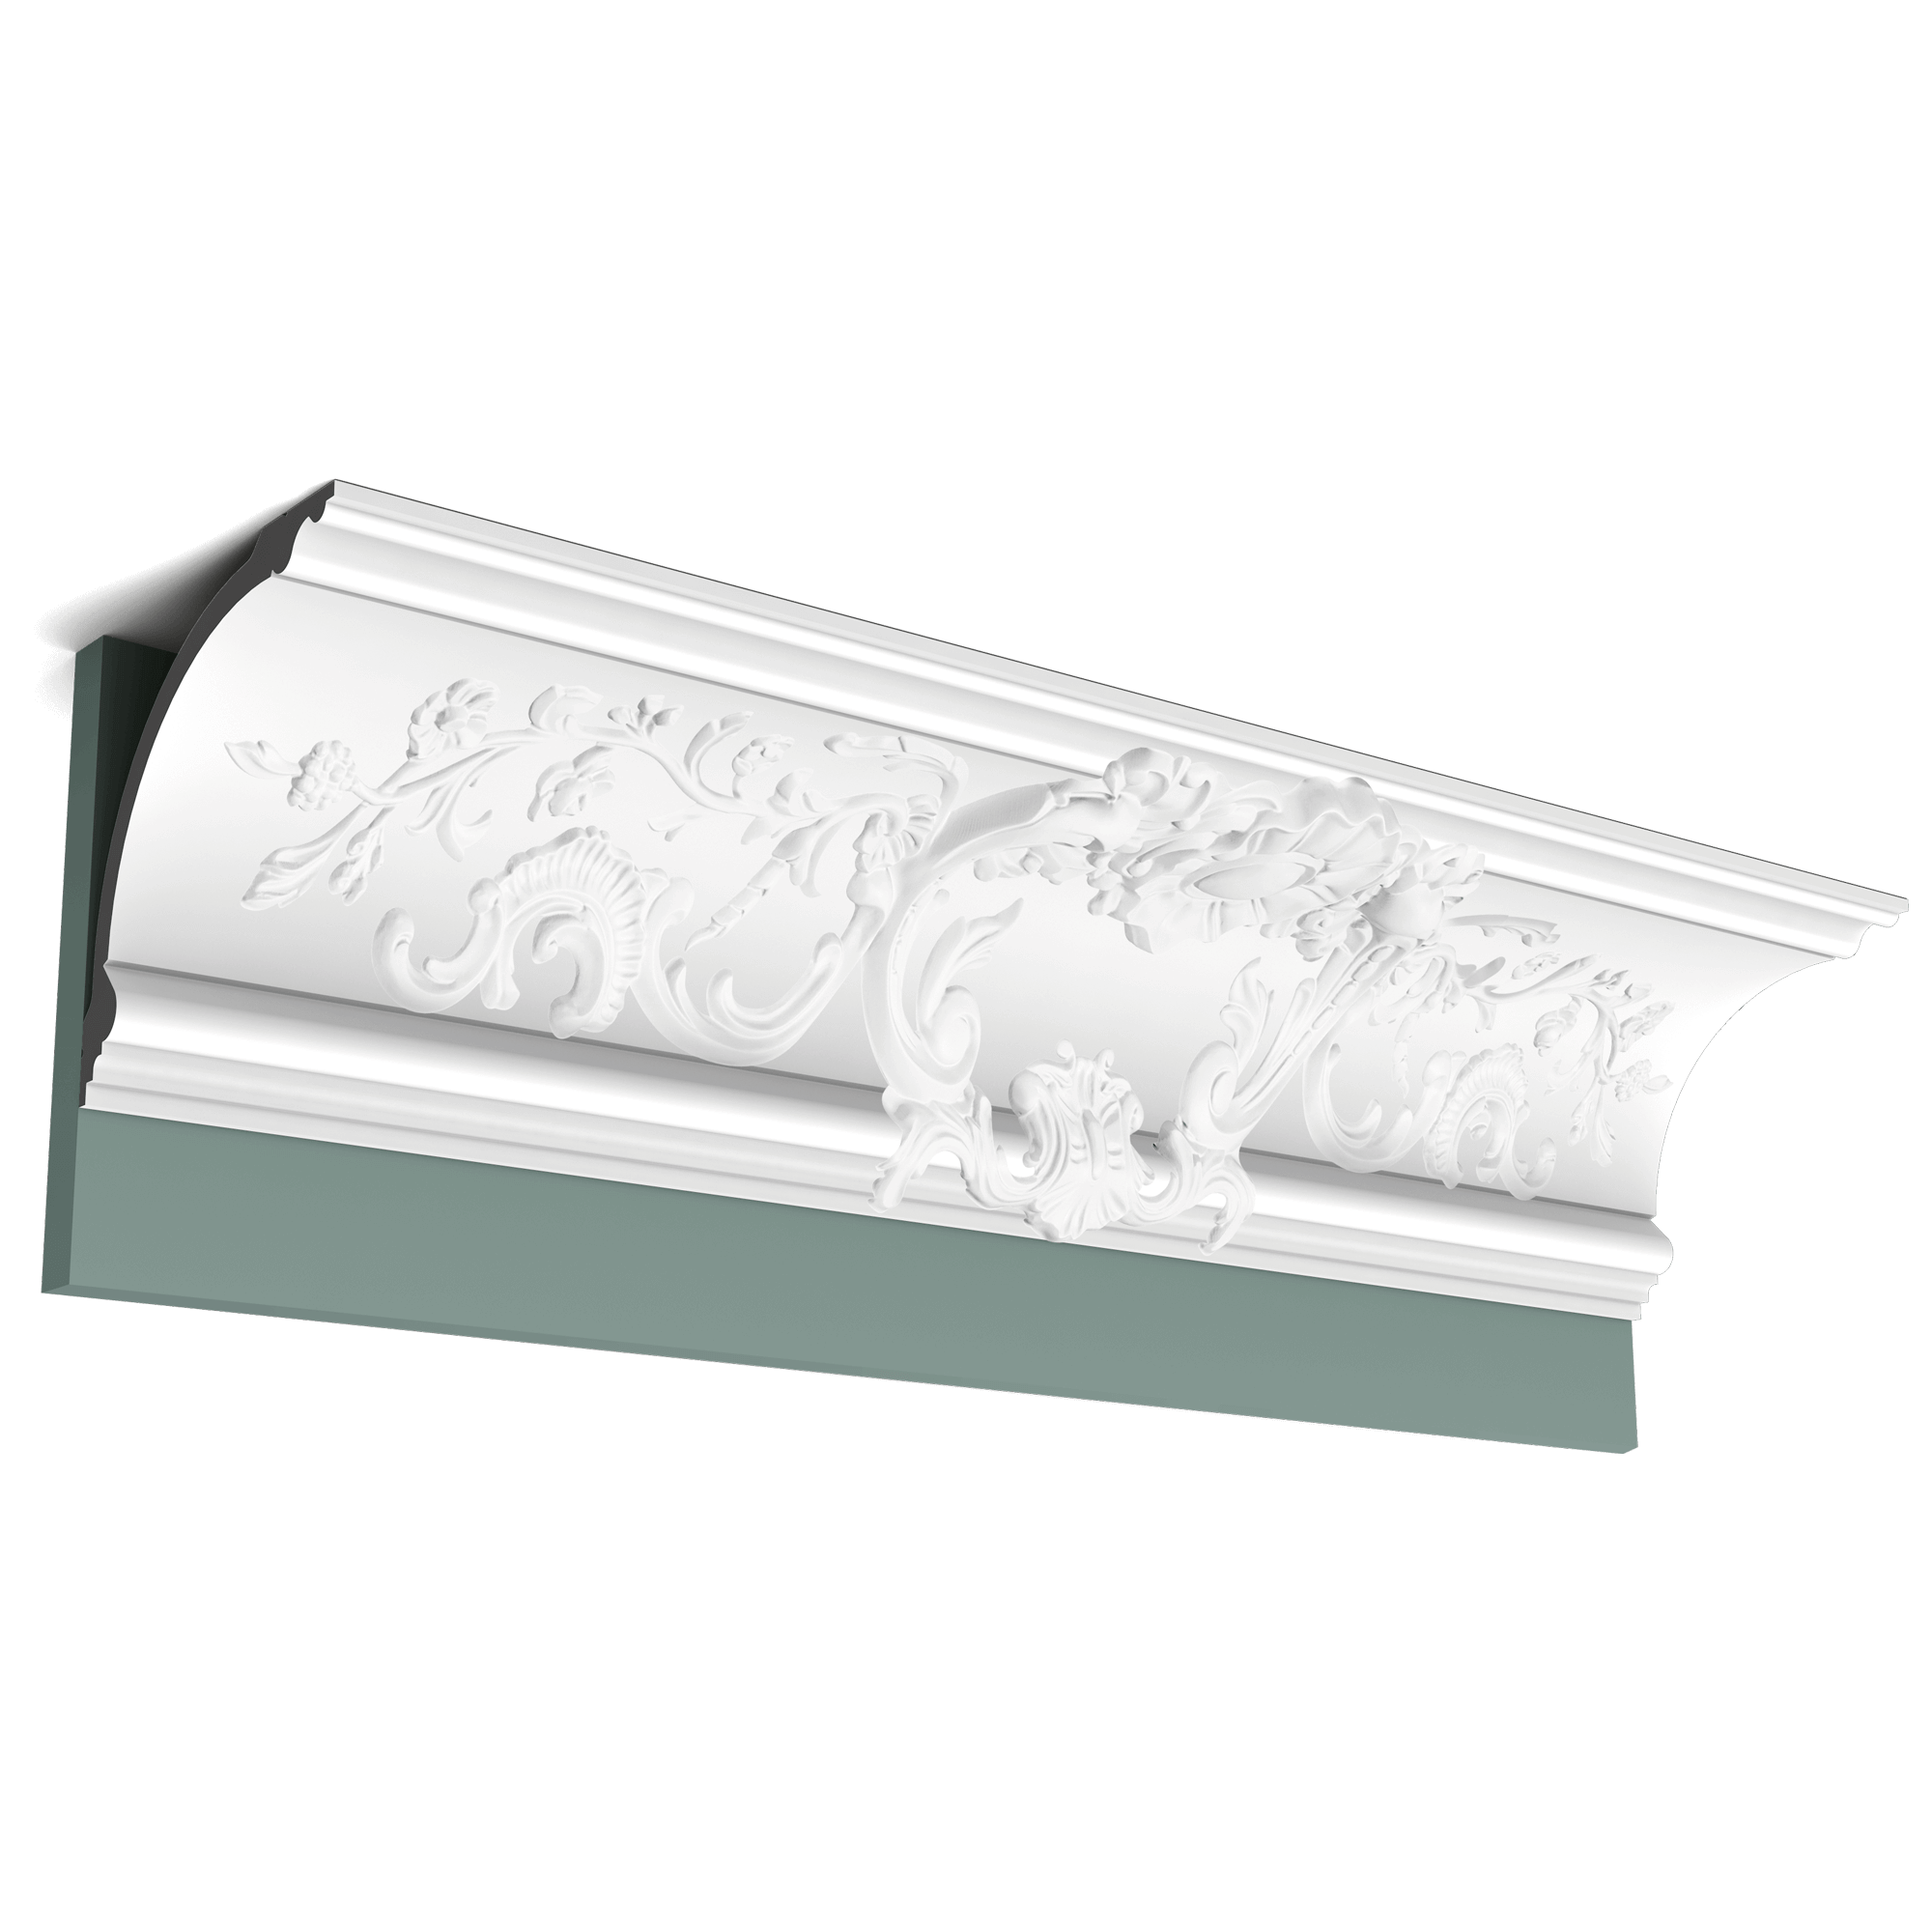 c338a cornice moulding 5b86 This stately cornice moulding is based on the C338, but further embellished with graceful decorative curlicues. Installation remark: It is necessary to screw this profile on the wall.